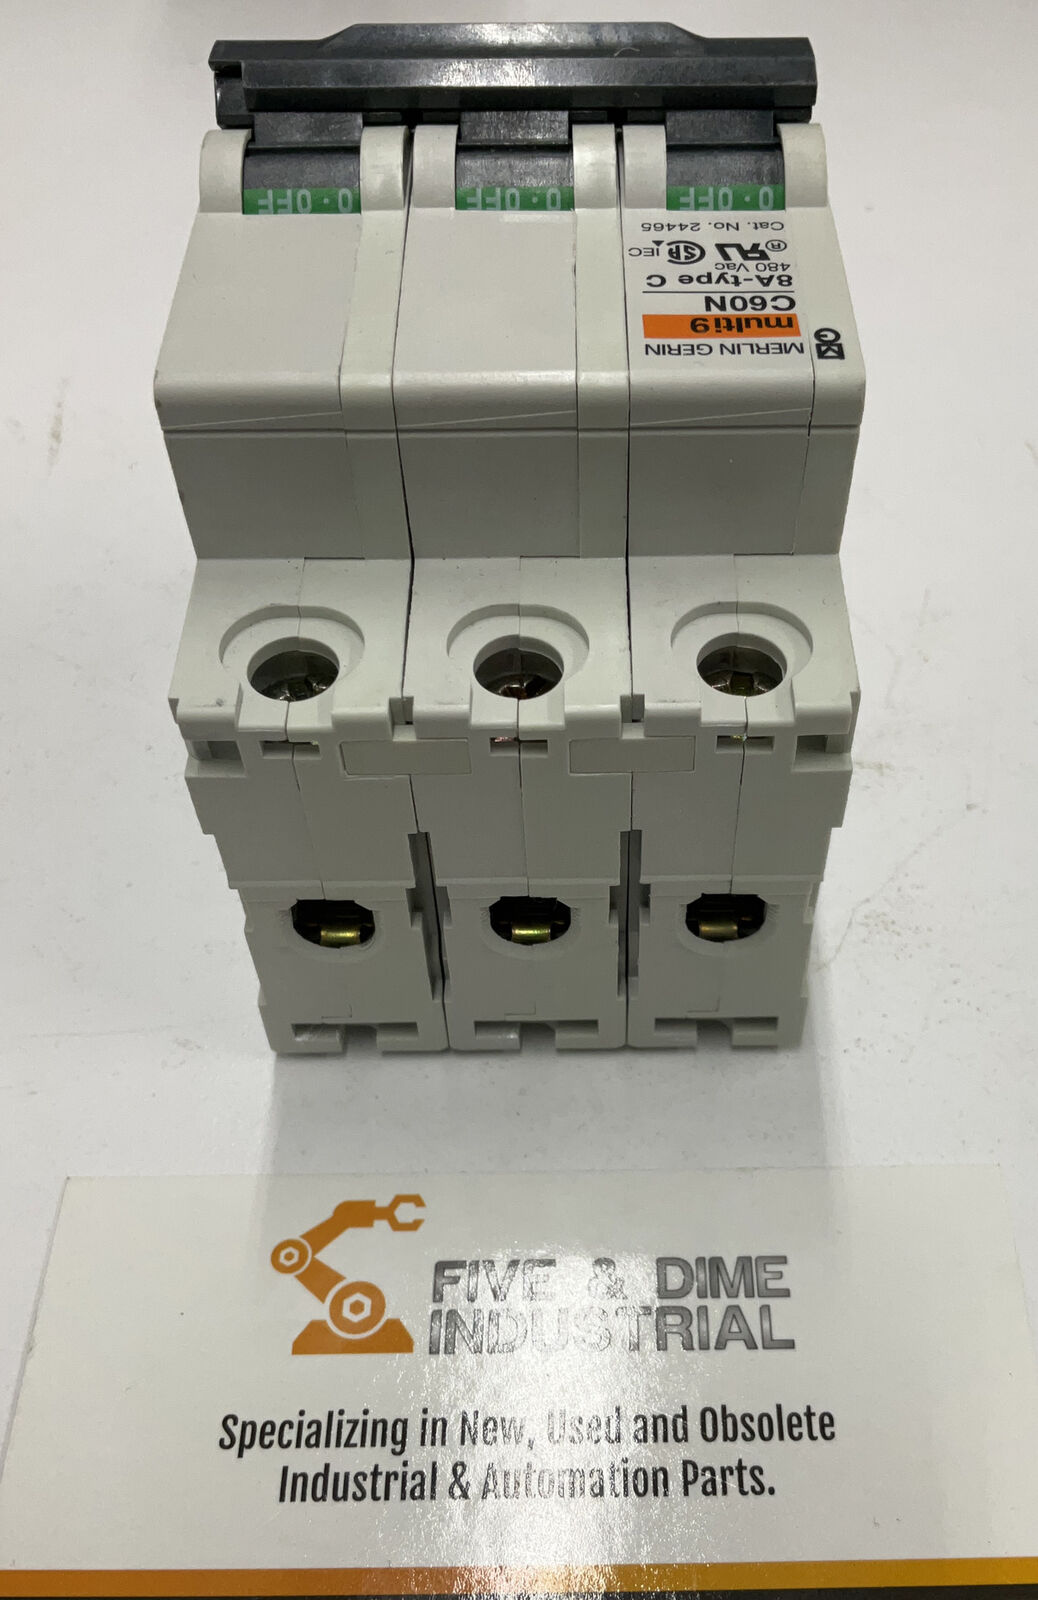 Square D Merlin MG24465 Multi9 3-Pole 8 Amp Protector (CL167)